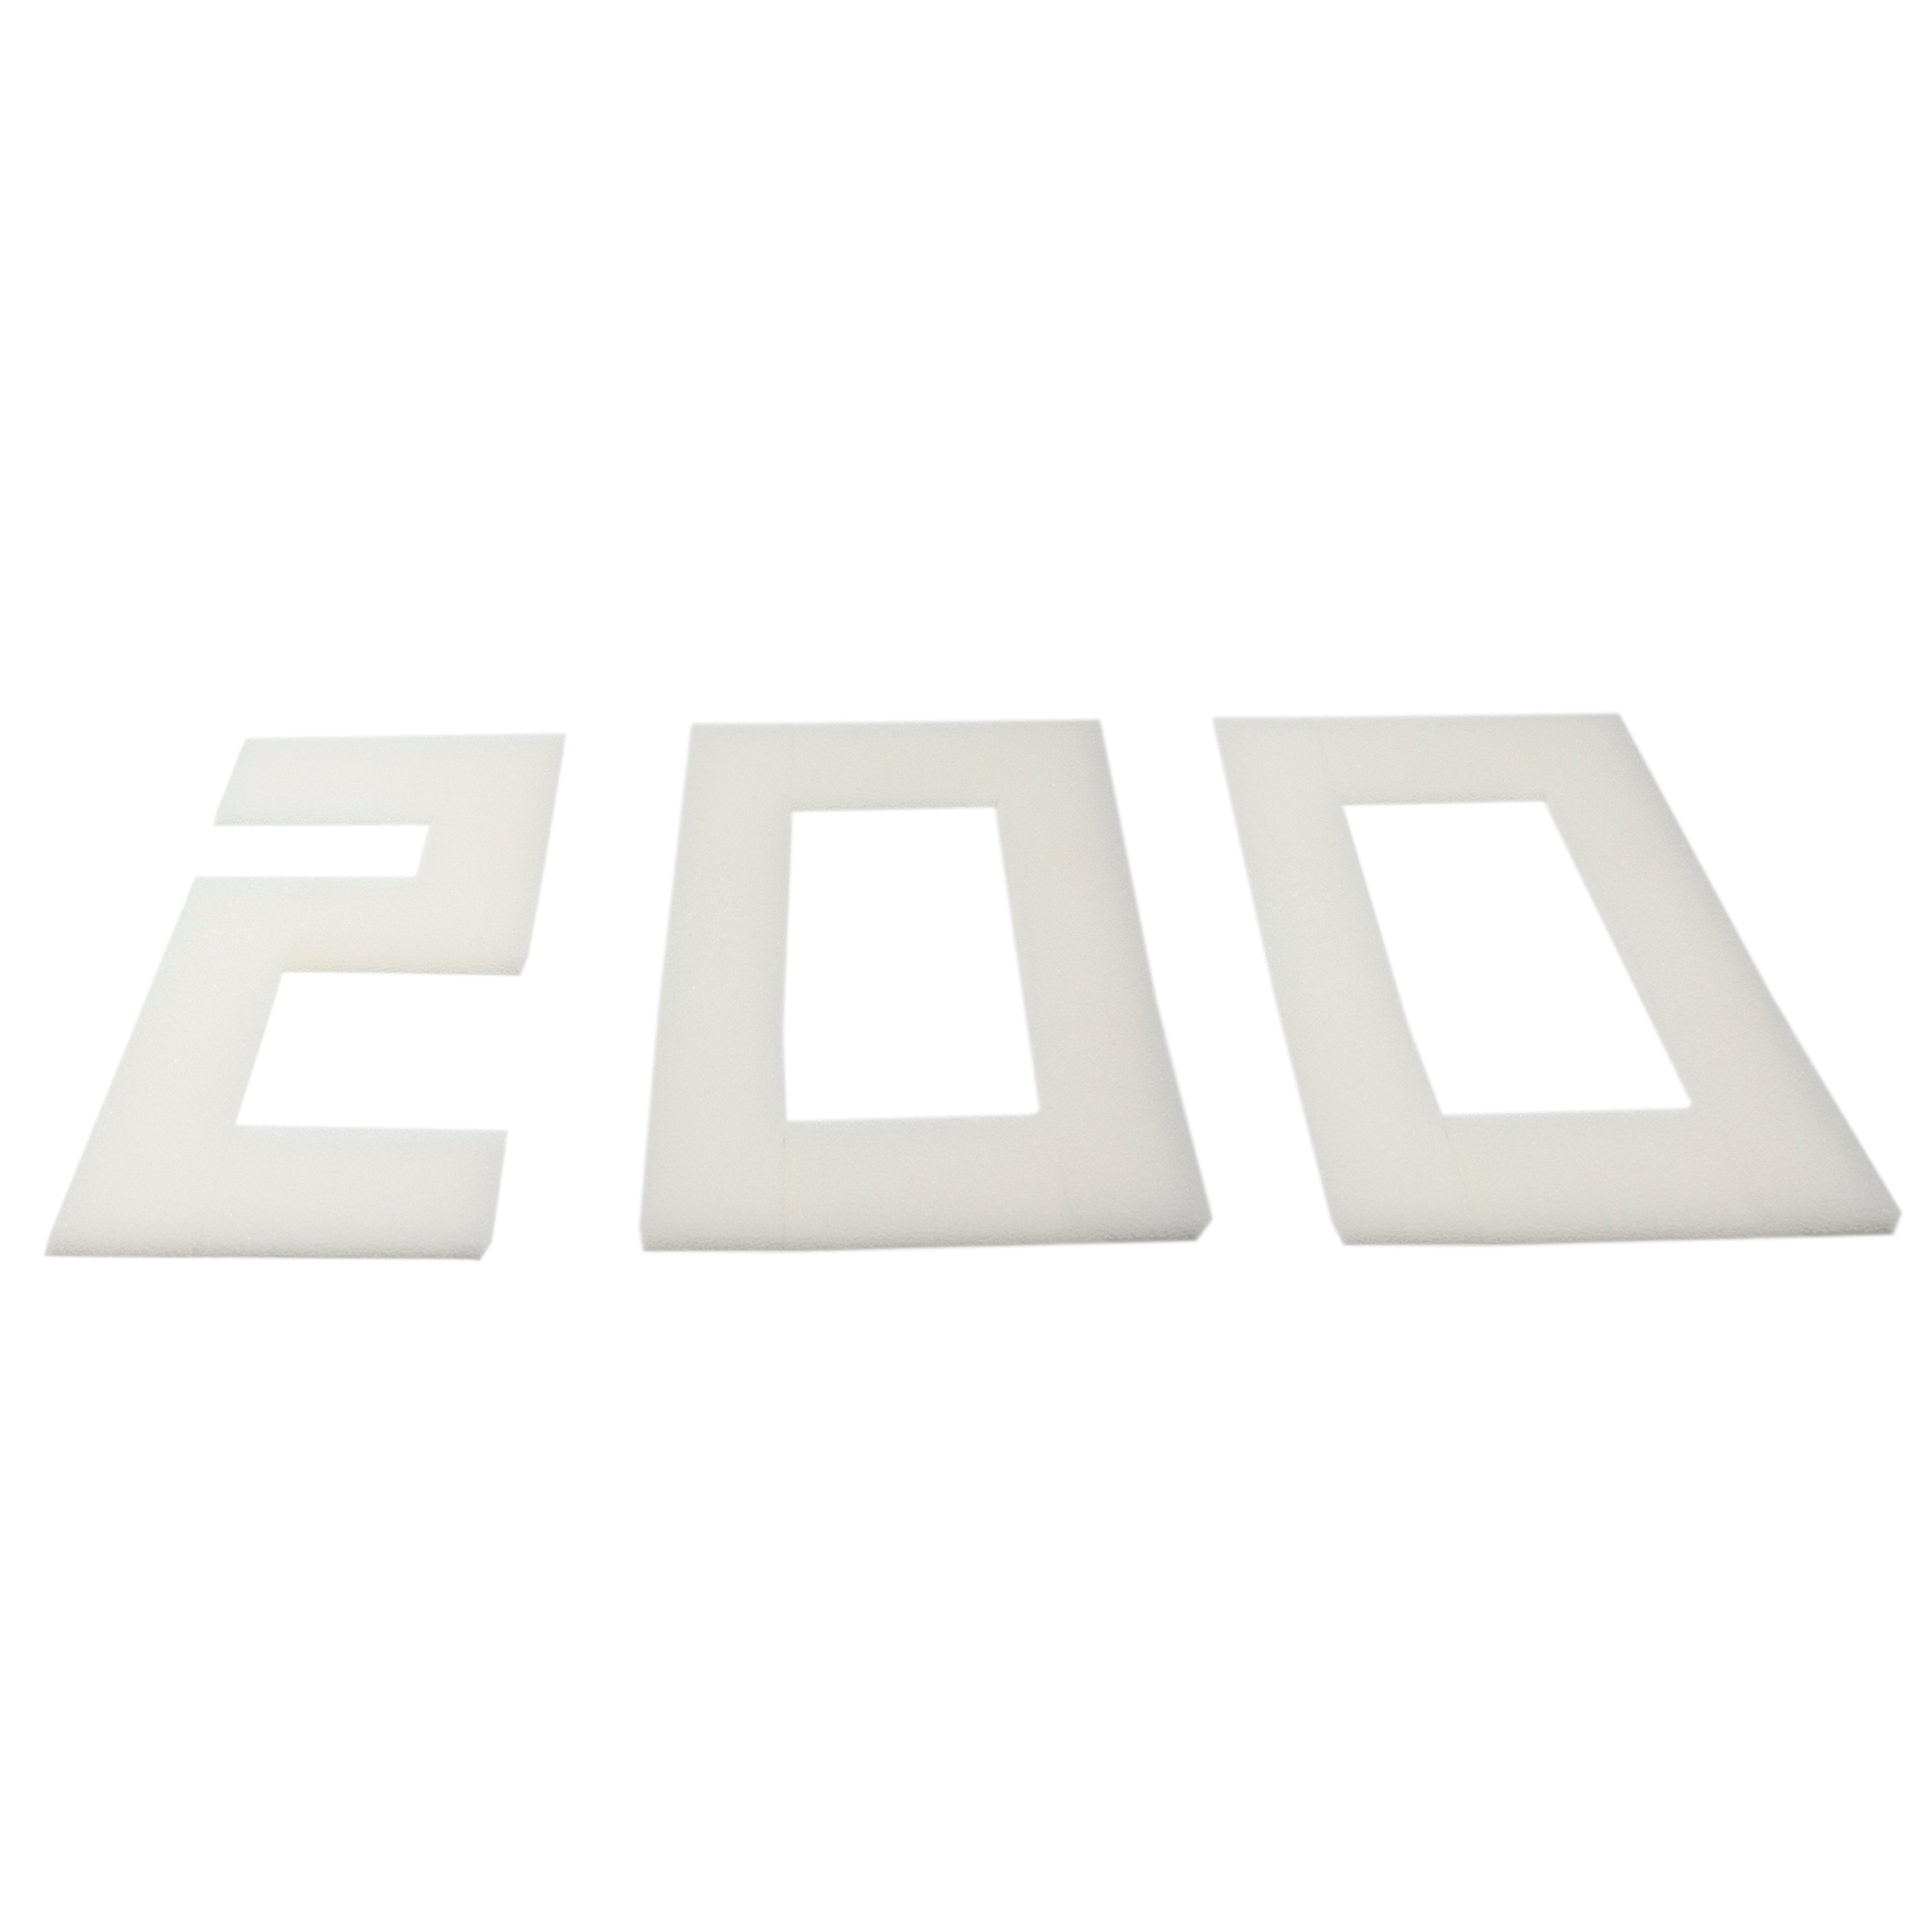 LTWHOME Compatible Foam Filters Suitable for Interpet Pf3 Internal Filter(Pack of 200)